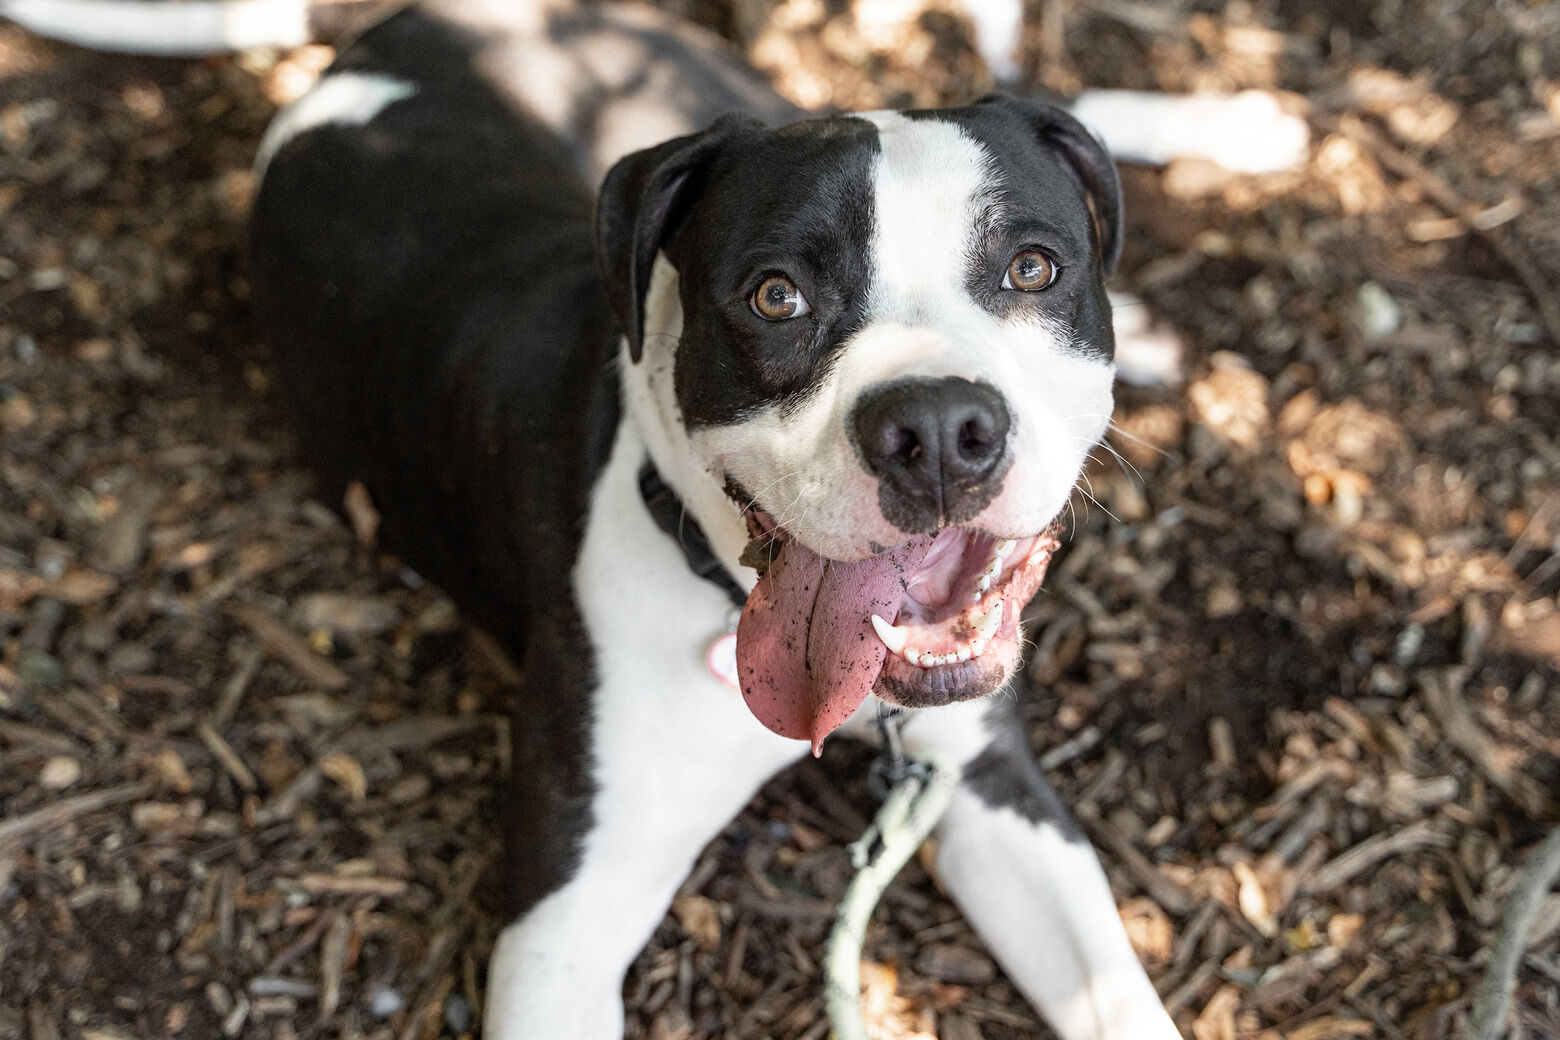 <p>Meet Pierre! When you&#8217;re around this sweet pup you can&#8217;t help but smile. He&#8217;s a big, friendly boy and loves to be around his favorite people at the shelter. Pierre walks well on leash and would be a great addition to a family with dogs who are looking to add to their pack.</p>
<p>Pierre was found alone, outside as a stray, but this darling boy has so much love to give and endless kisses for his future family.</p>
<p>With summer finally here and over 90 dogs in our shelter looking for a home, now is the perfect time to find your new best friend during our June pay-what-you-can adoption event for dogs like Pierre, who are 30 pounds and over! Learn more at <a href="https://www.humanerescuealliance.org/" target="_blank" rel="noopener">humanerescuealliance.org</a>.</p>
